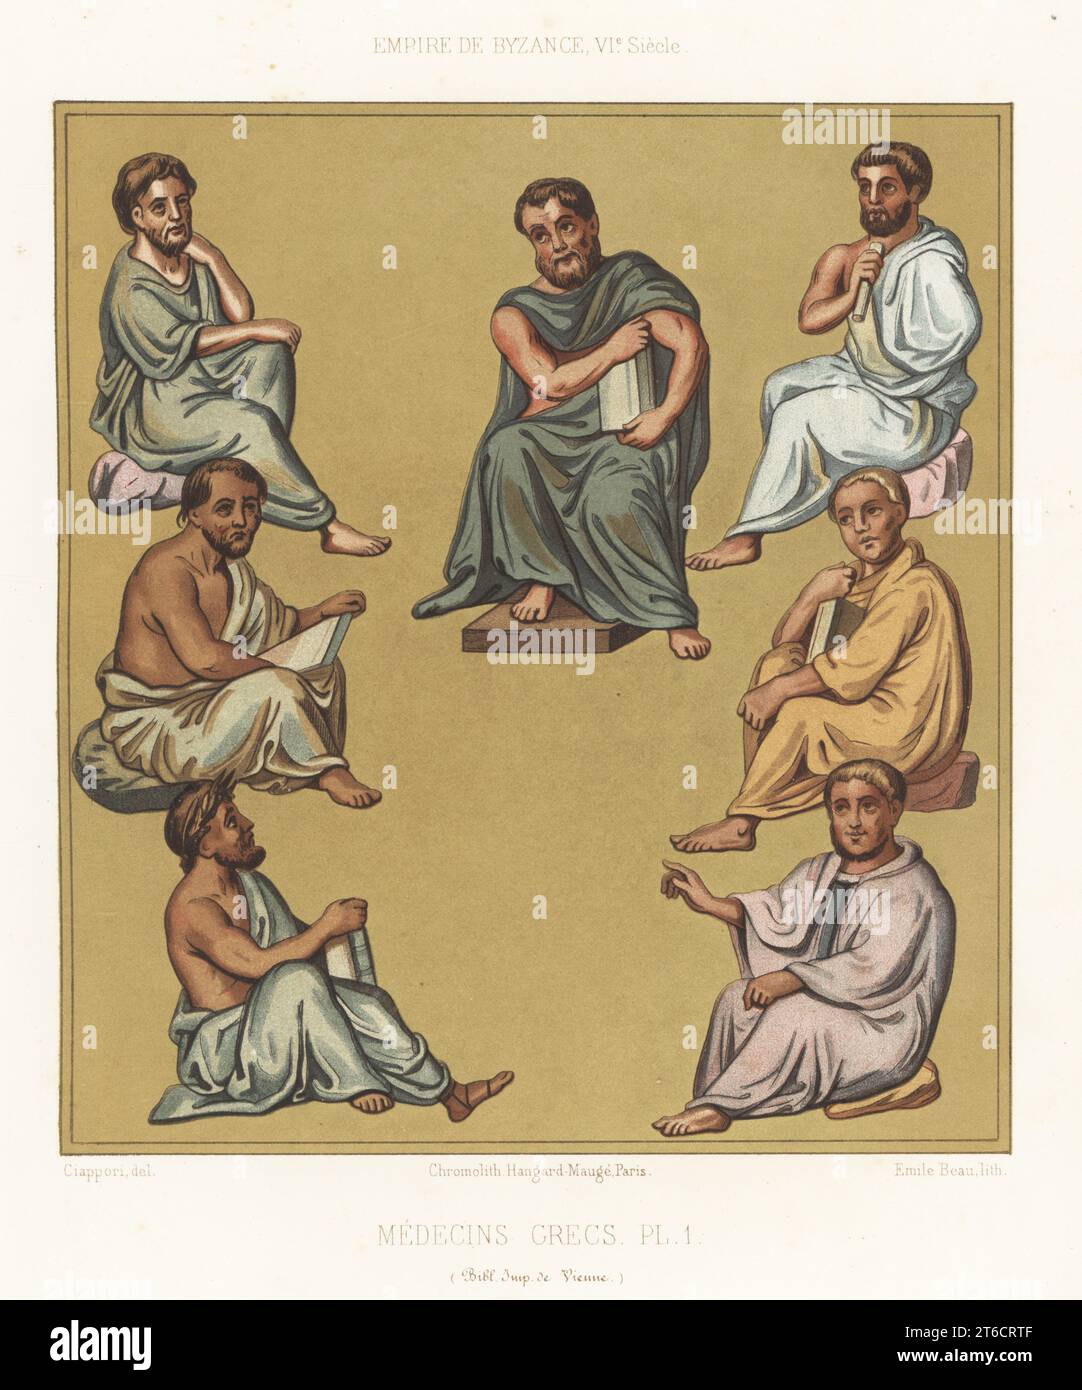 Portraits of Greek physicians, Byzantine Empire, 6th century. Galen (c. 129-200) on a a chair in the middle. At left, Crateuas or Krateuas (c. 2nd century BC, top), Apollonius Mys (1st century BC, middle) and Andreas (died c. 217 BC, bottom). At right, Dioscurides (c. 40-90 AD, top), Nicander (197-130 BC, center), and Rufus of Ephesus (c. 53-117 AD, bottom). Medecins Grecs, Empire de Byzance, VIe siecle. Bibliotheque Imp. de Vienne. Chromolithograph by Emile Beau after an illustration by Claudius Joseph Ciappori from Charles Louandres Les Arts Somptuaires, The Sumptuary Arts, Hangard-Mauge, Pa Stock Photo